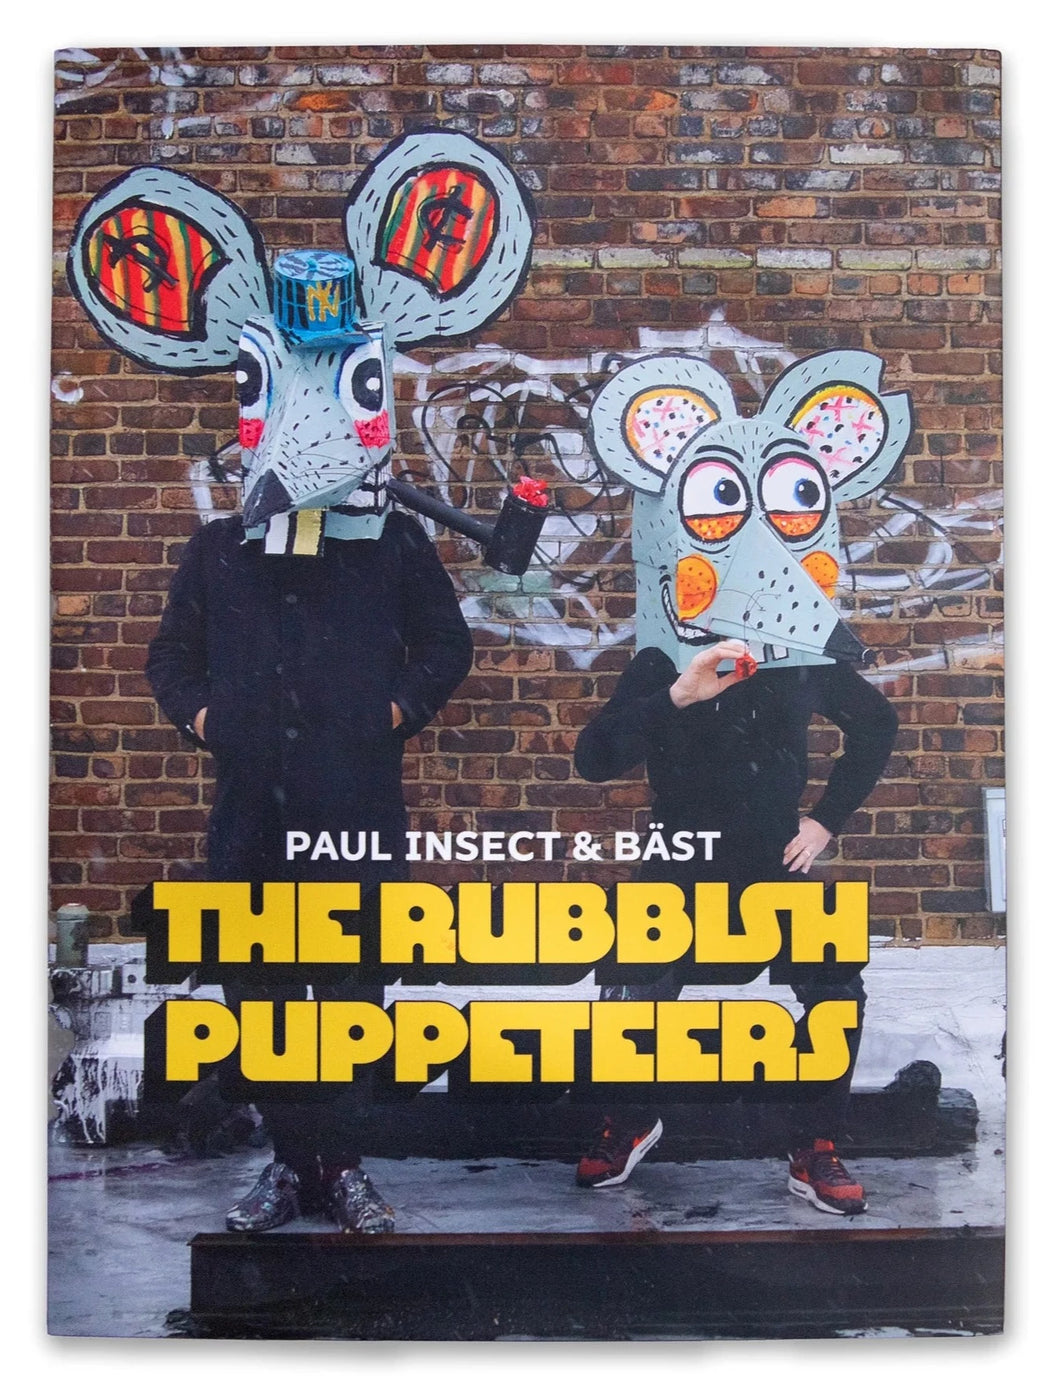 The Rubbish Puppeteers